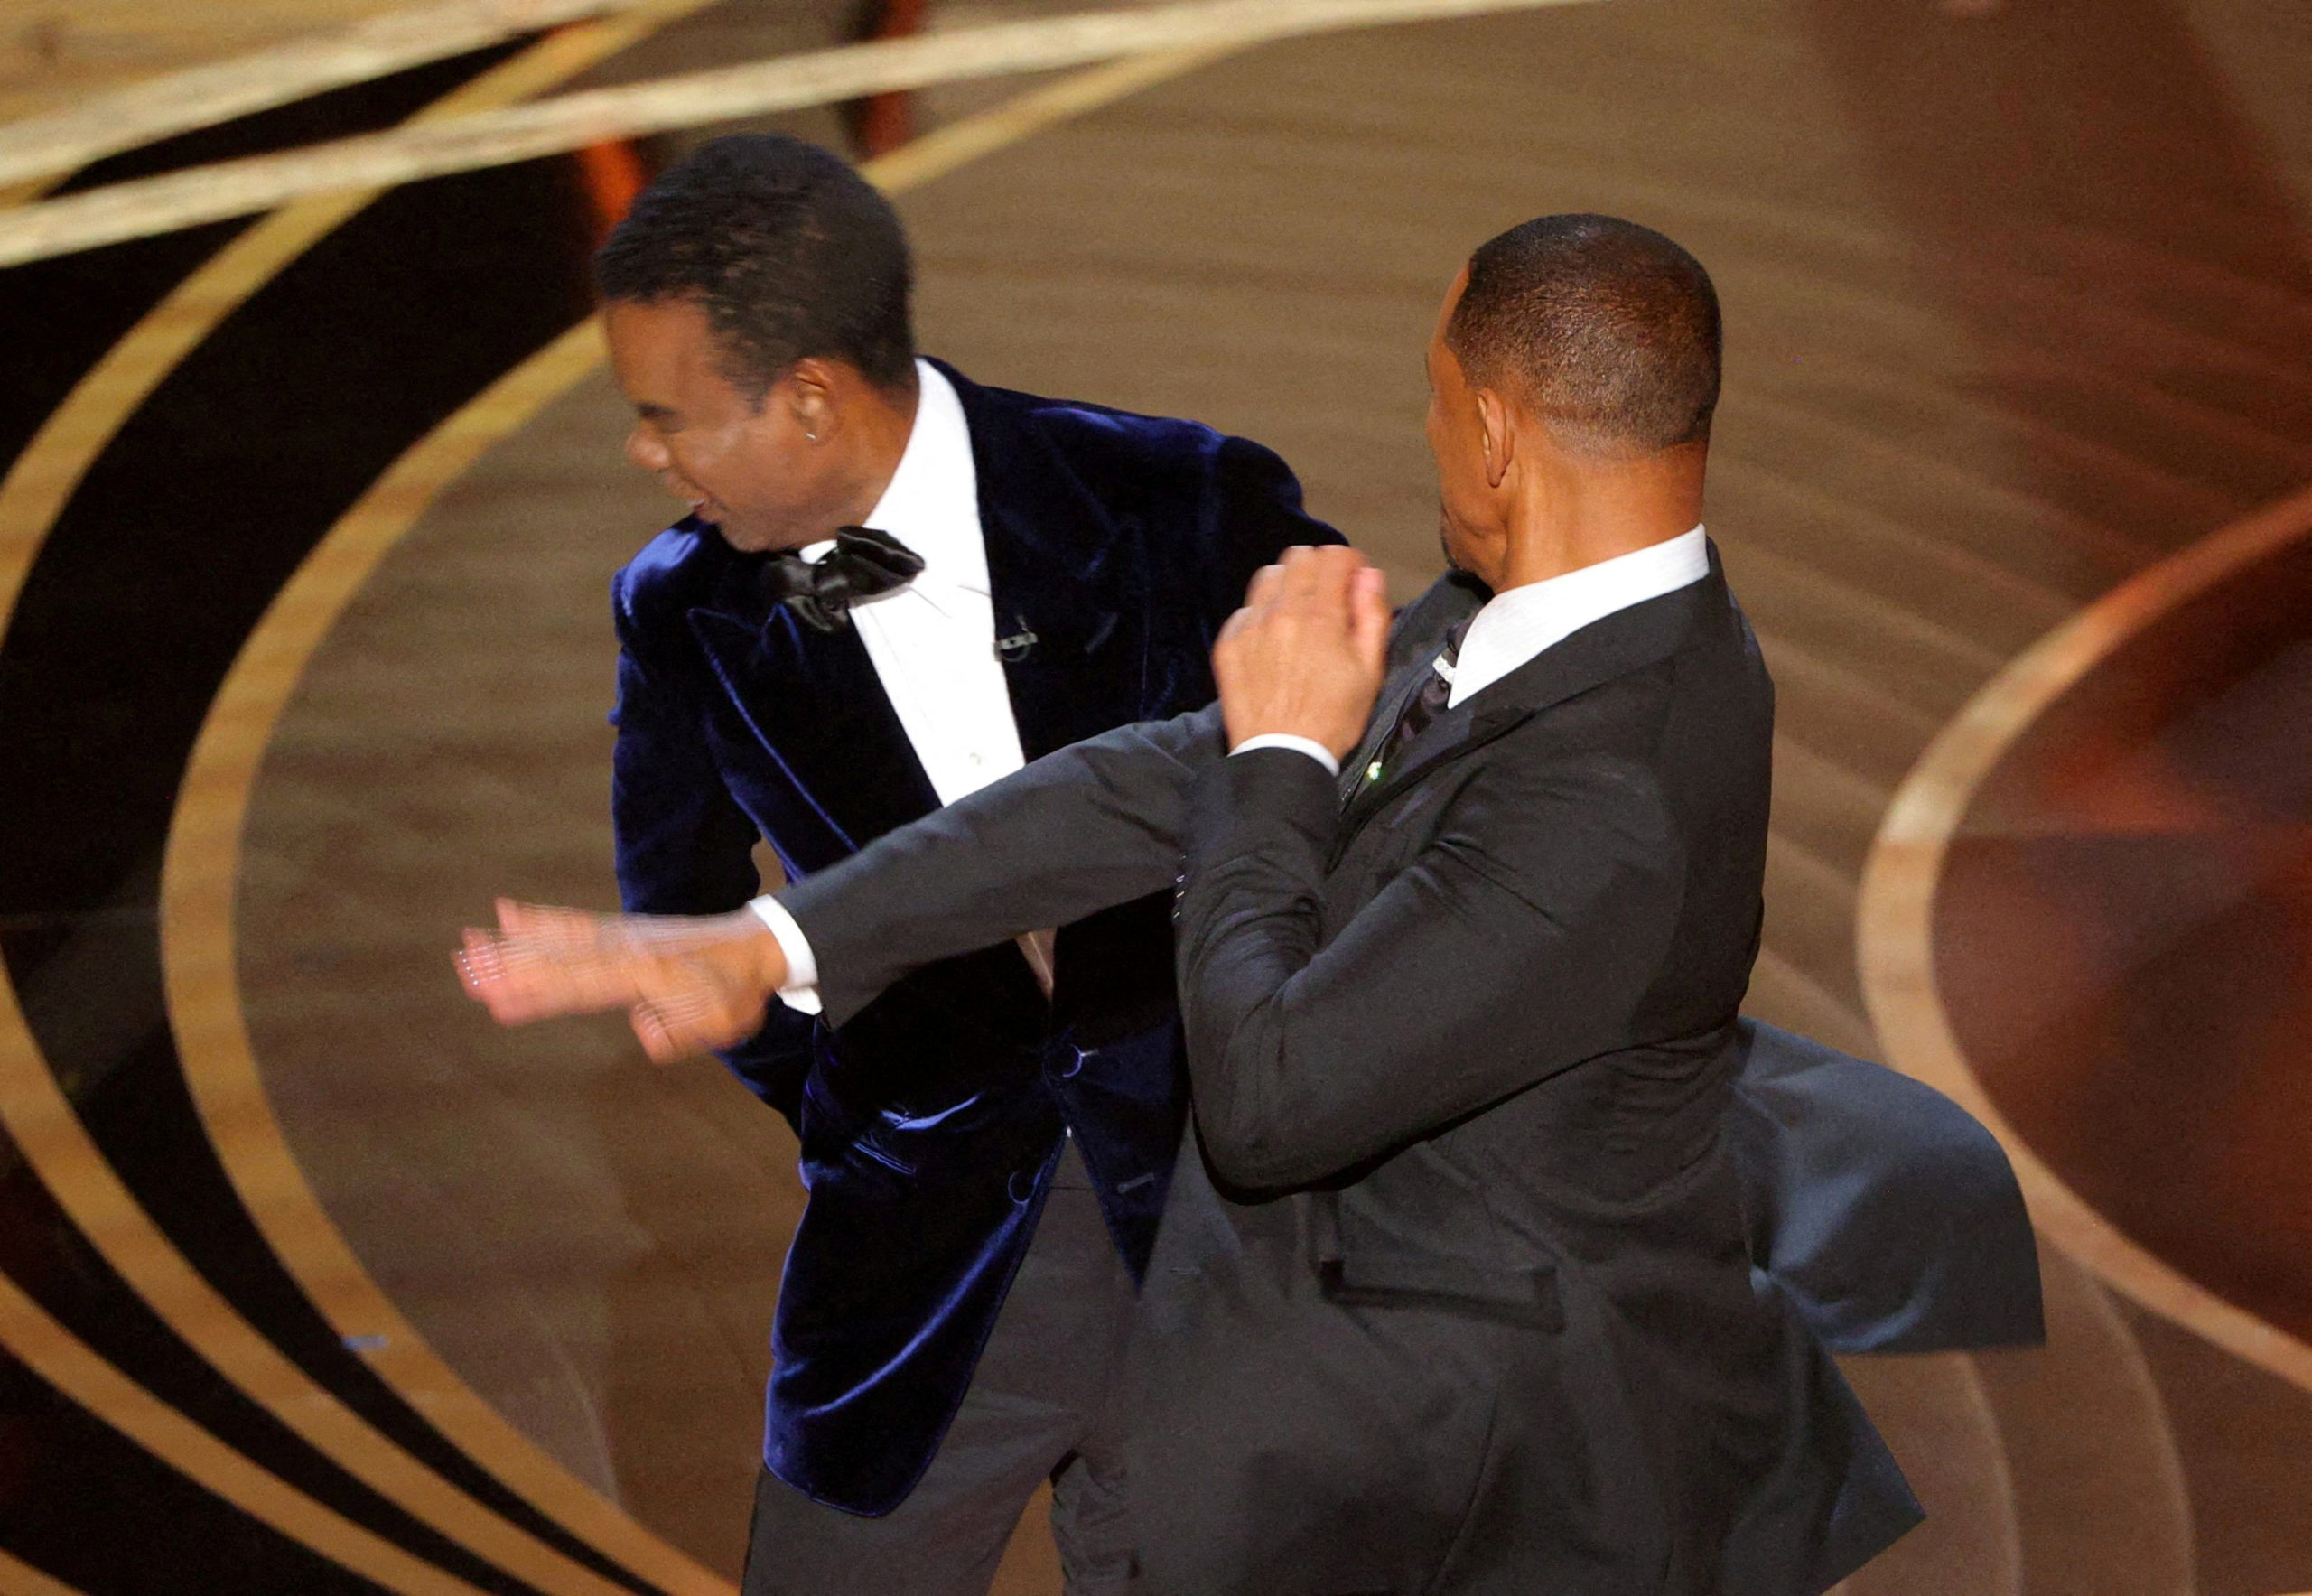 FILE PHOTO: Will Smith hits Chris Rock onstage during the 94th Academy Awards in Hollywood, Los Angeles, California, U.S., March 27, 2022. REUTERS/Brian Snyder/File Photo